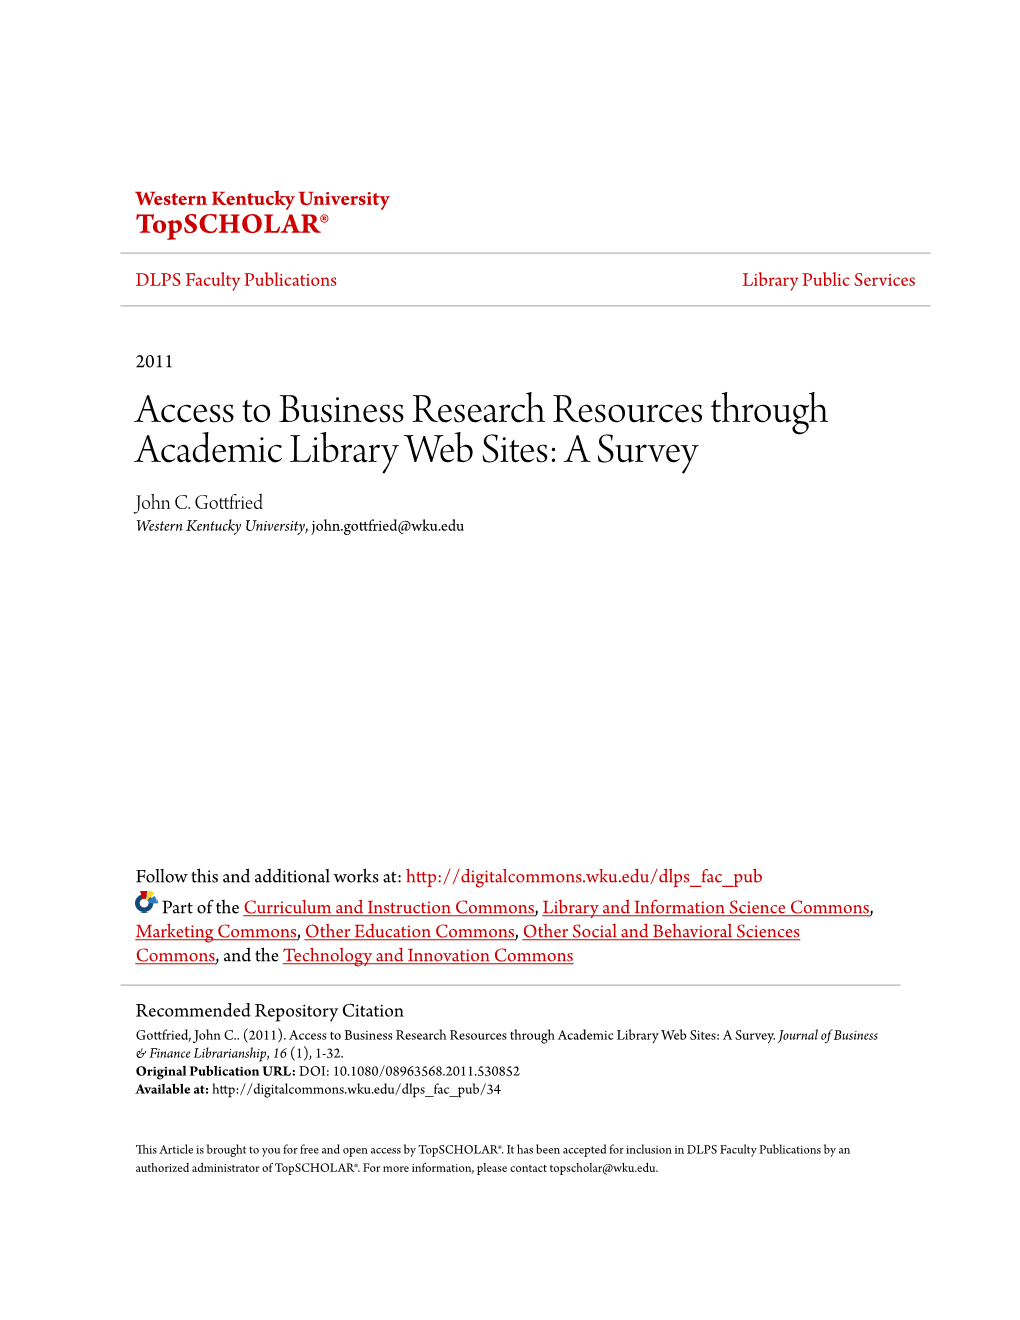 Access to Business Research Resources Through Academic Library Web Sites: a Survey John C